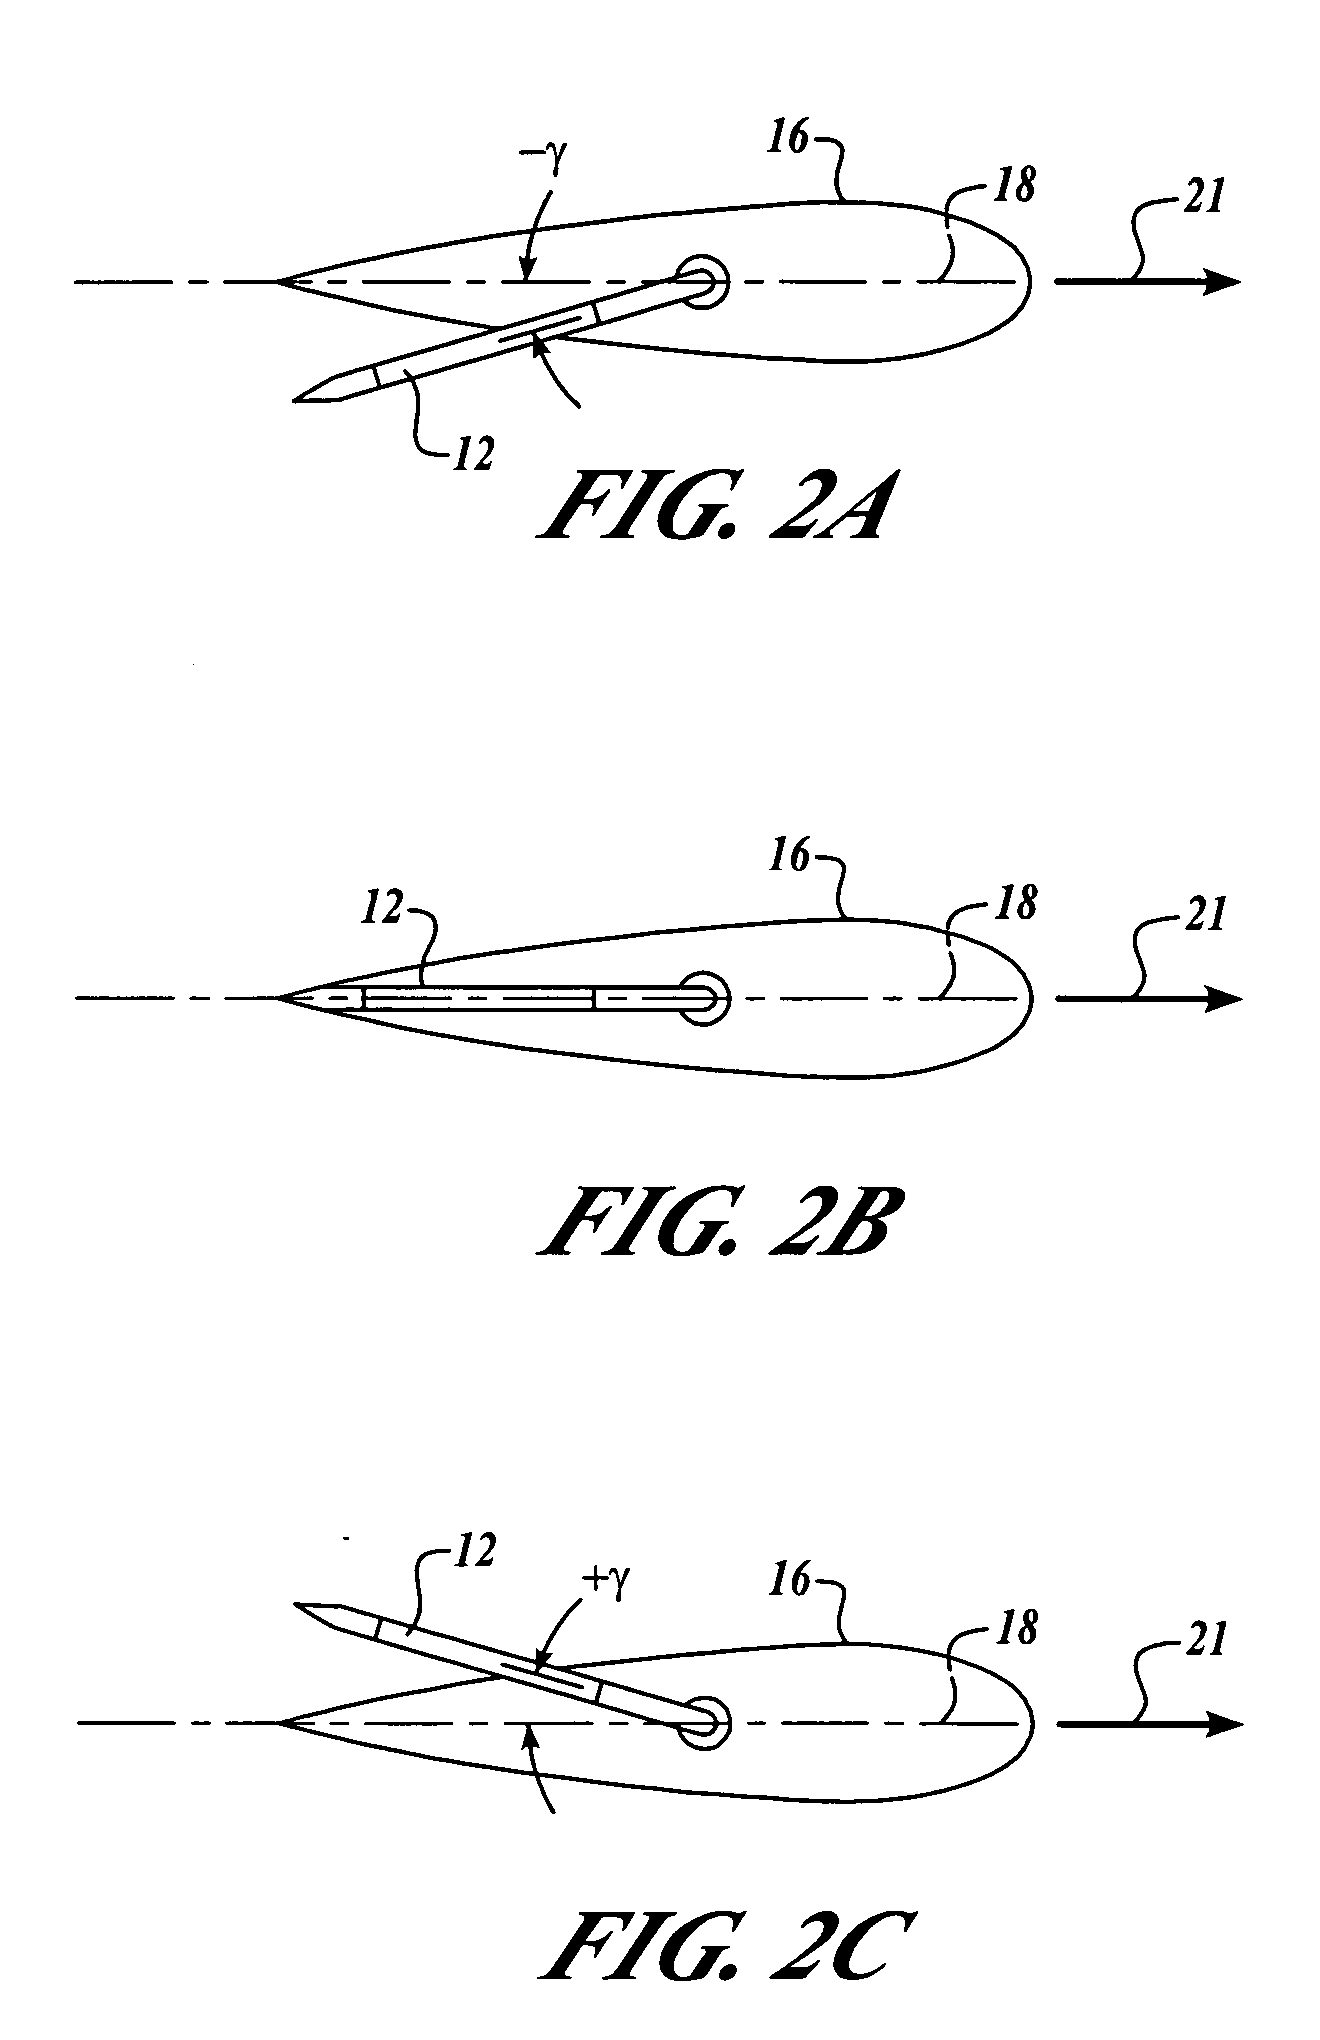 System and method for improved rotor tip performance